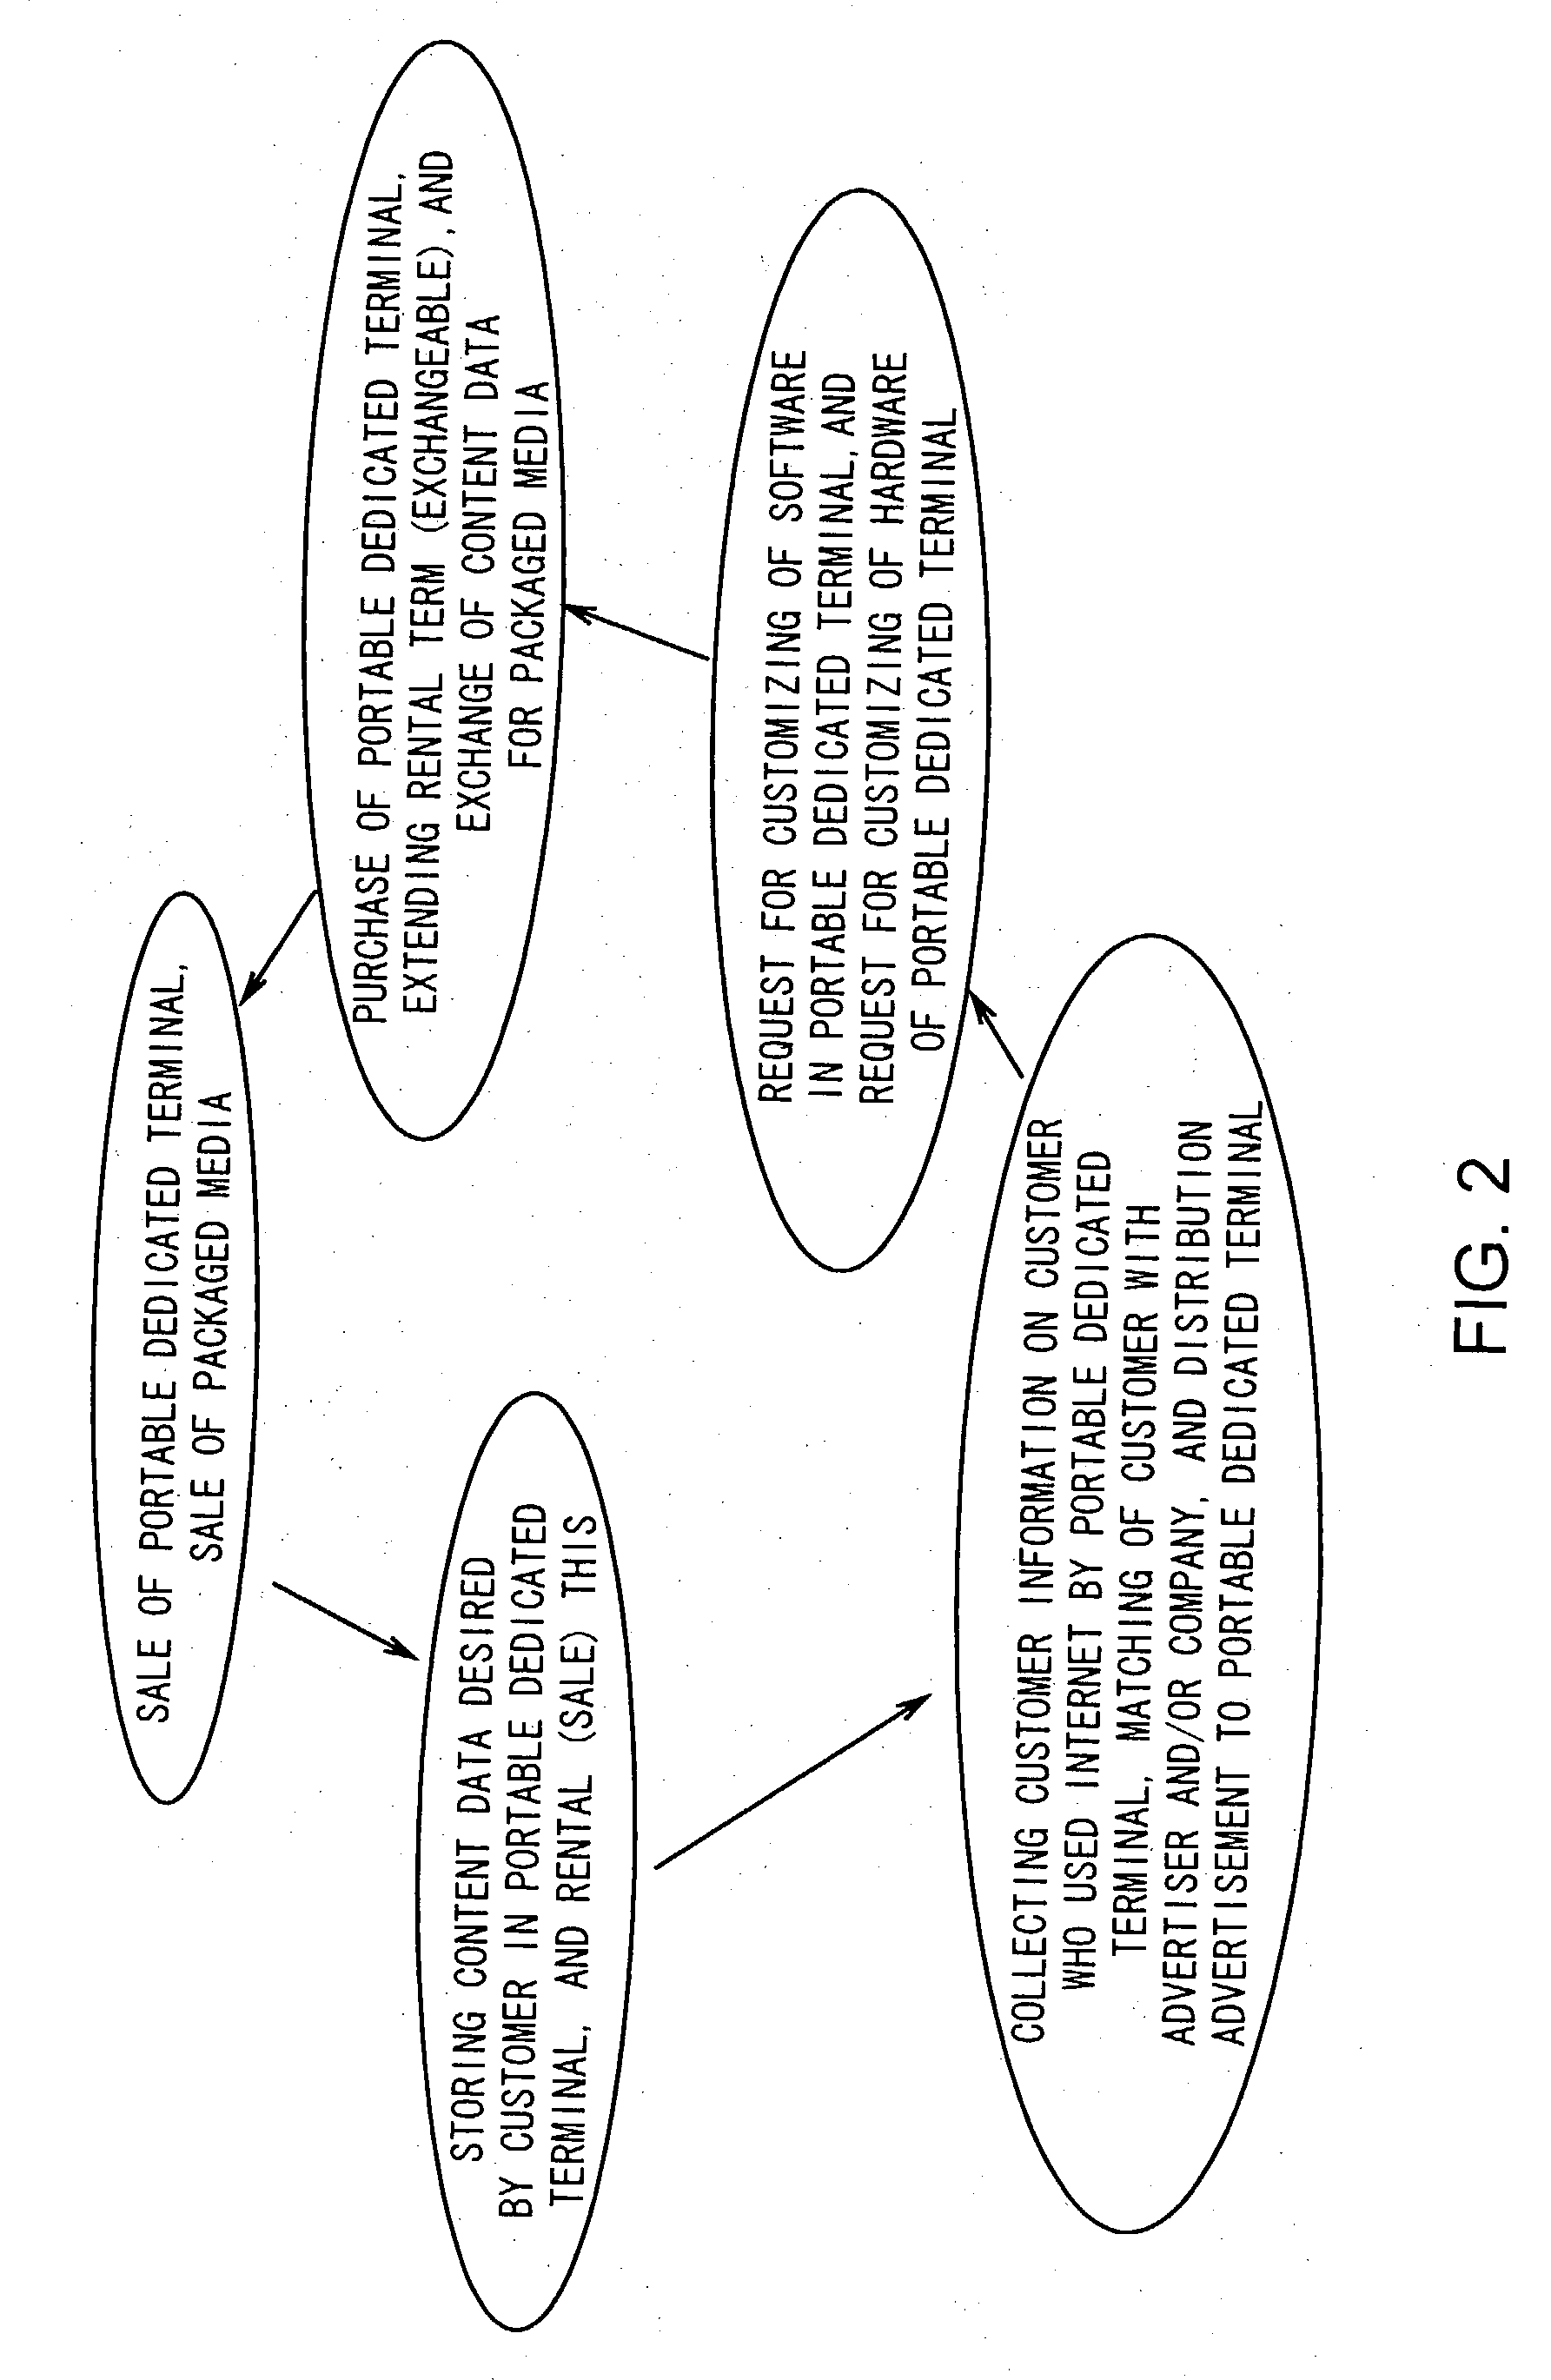 Method for providing and obtaining content